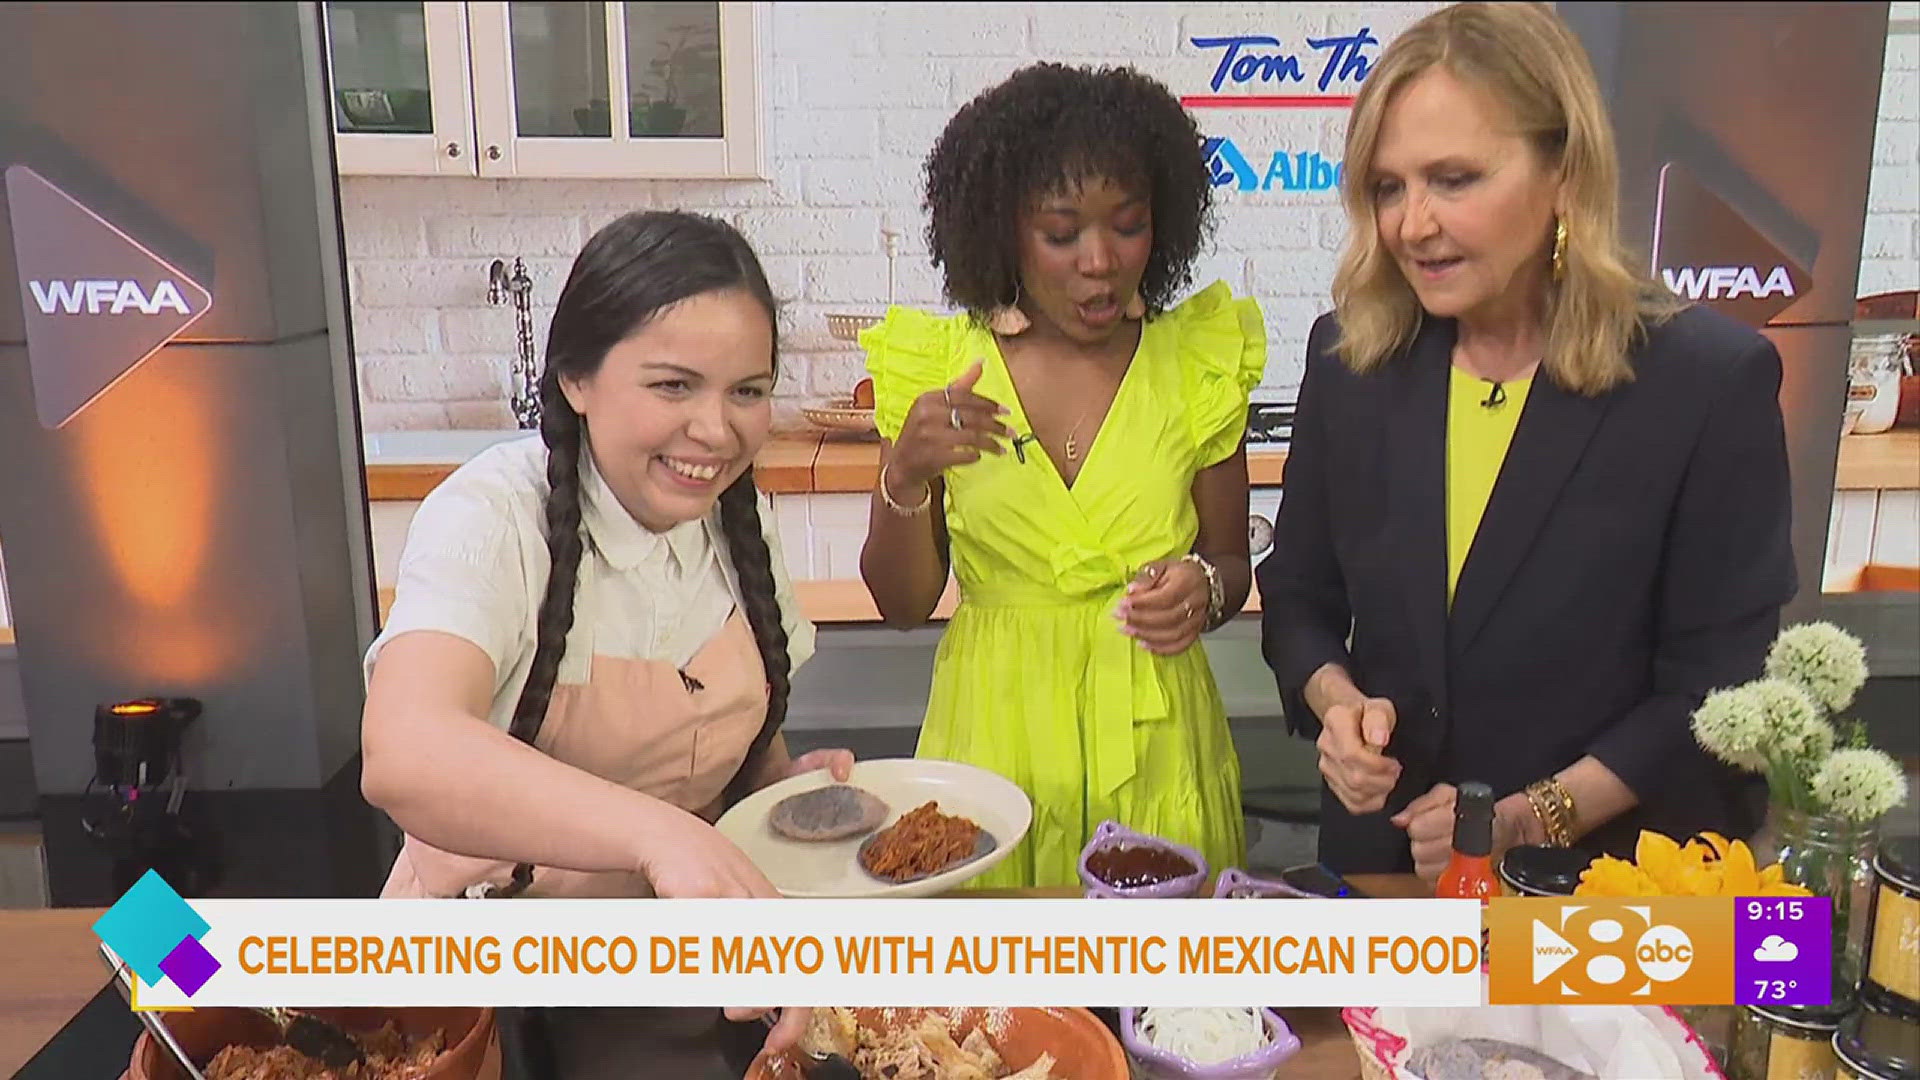 Molino Olōyō chef and owner Olivia Lopez whips up some authentic tacos for Erin and Jane. This segment is sponsored by Tom Thumb & Albertsons.